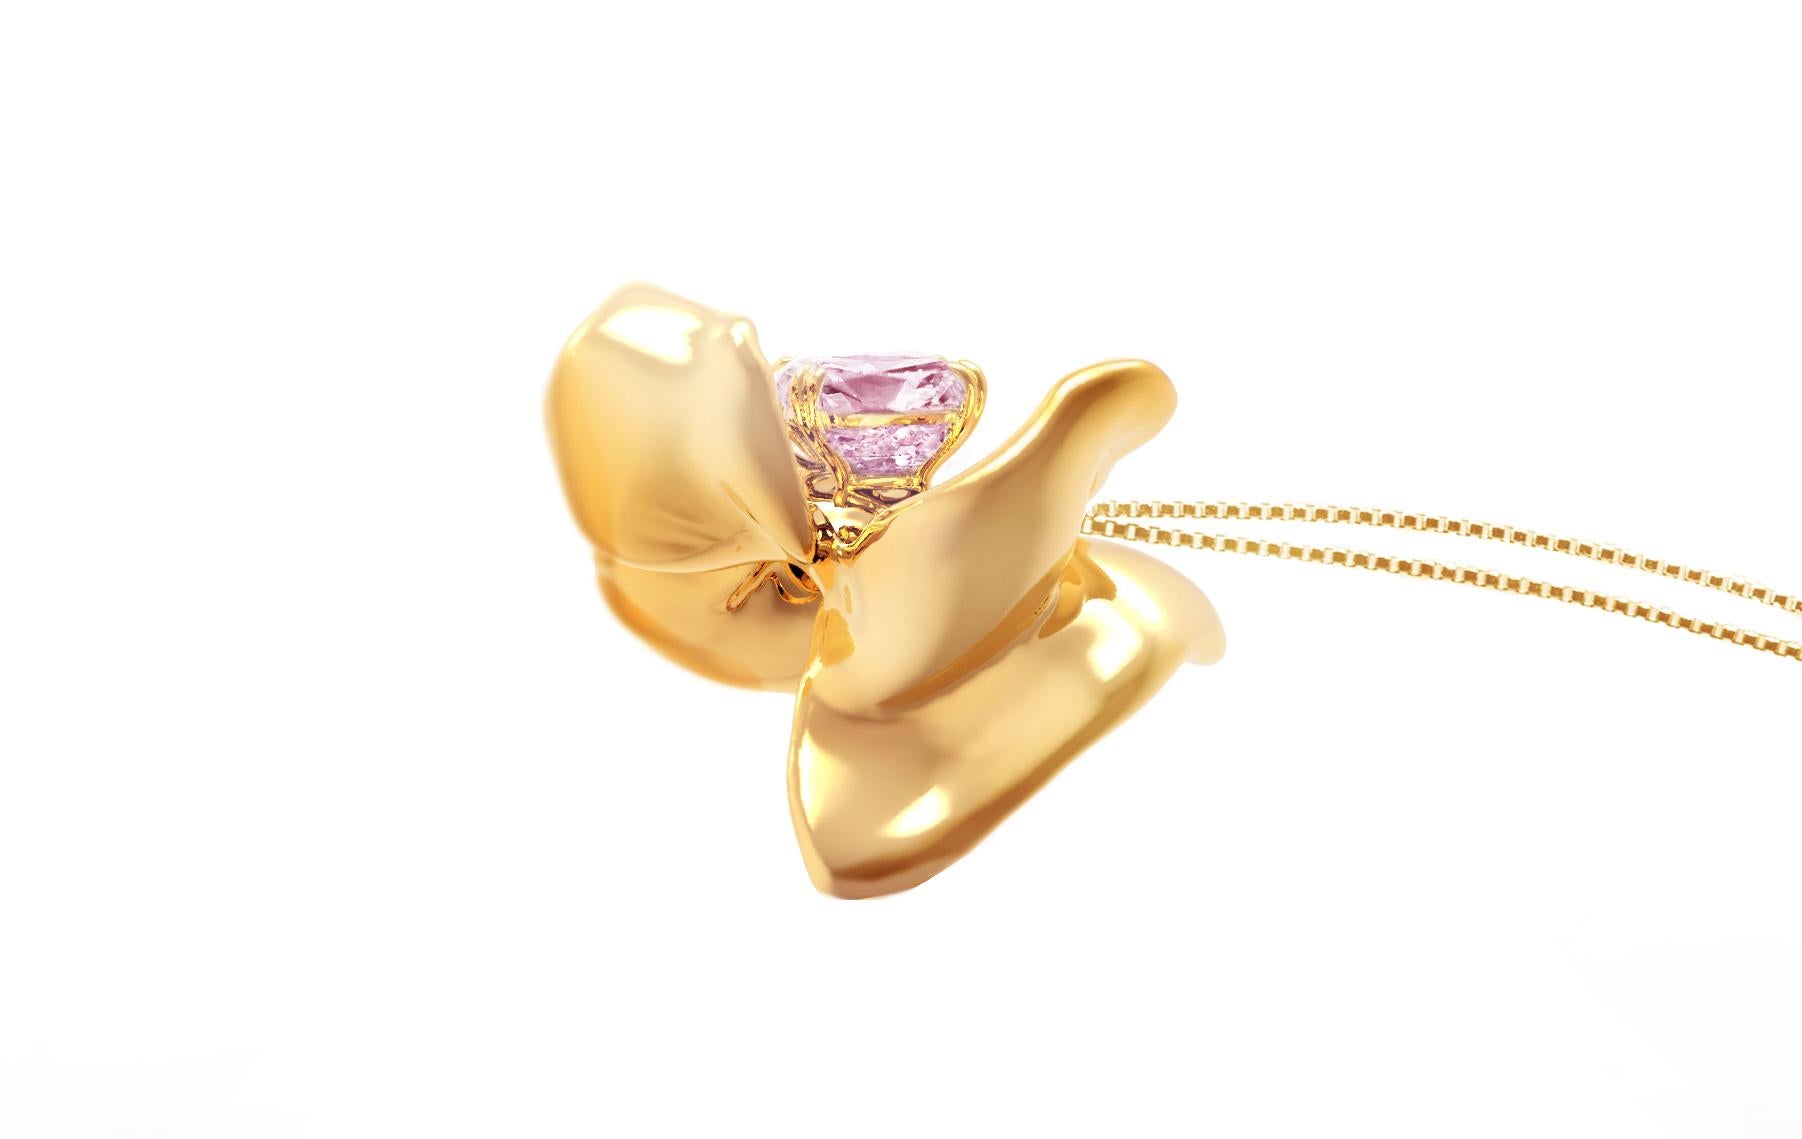 This Magnolia Flower contemporary pendant necklace is made of 18 karat rose gold and features a beautiful berry purple cushion spinel weighing 1.34 carats. The delicate water-surface of the spinel reflects and multiplies the light, creating a